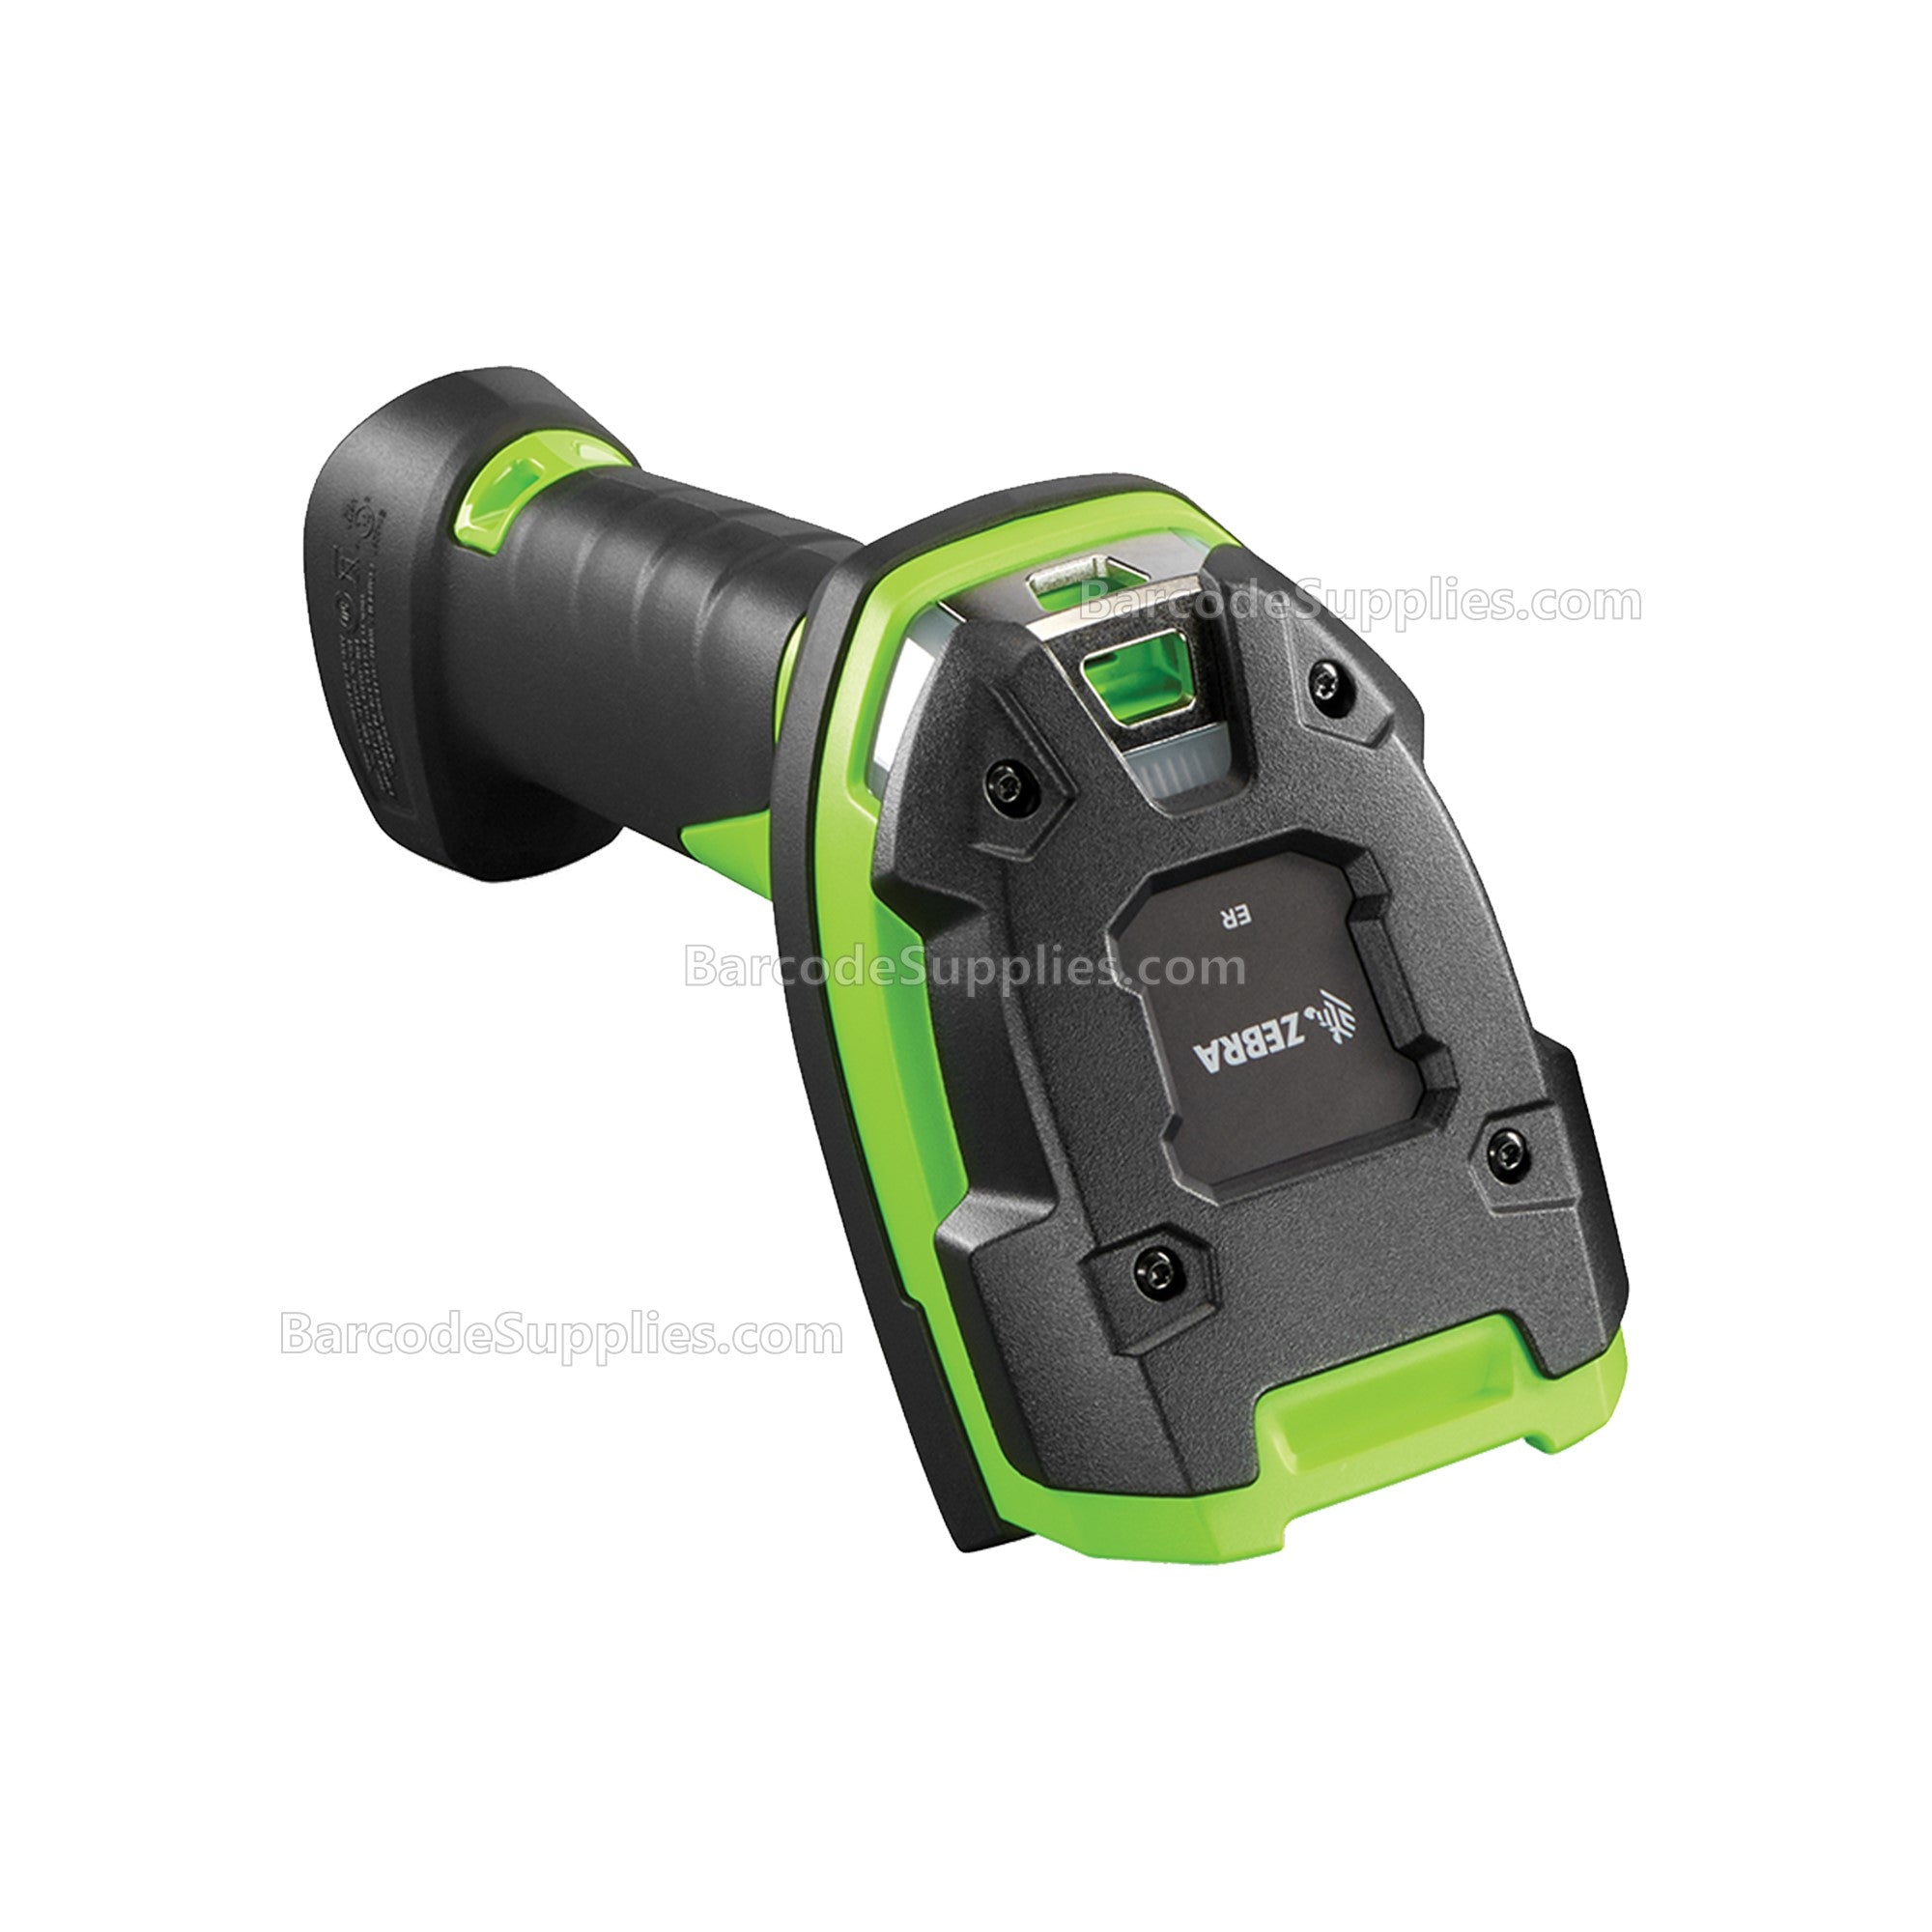 Zebra DS3608: TAA, RUGGED, AREA IMAGER, EXTENDED RANGE, CORDED, INDUSTRIAL GREEN, VIBRATION MOTOR